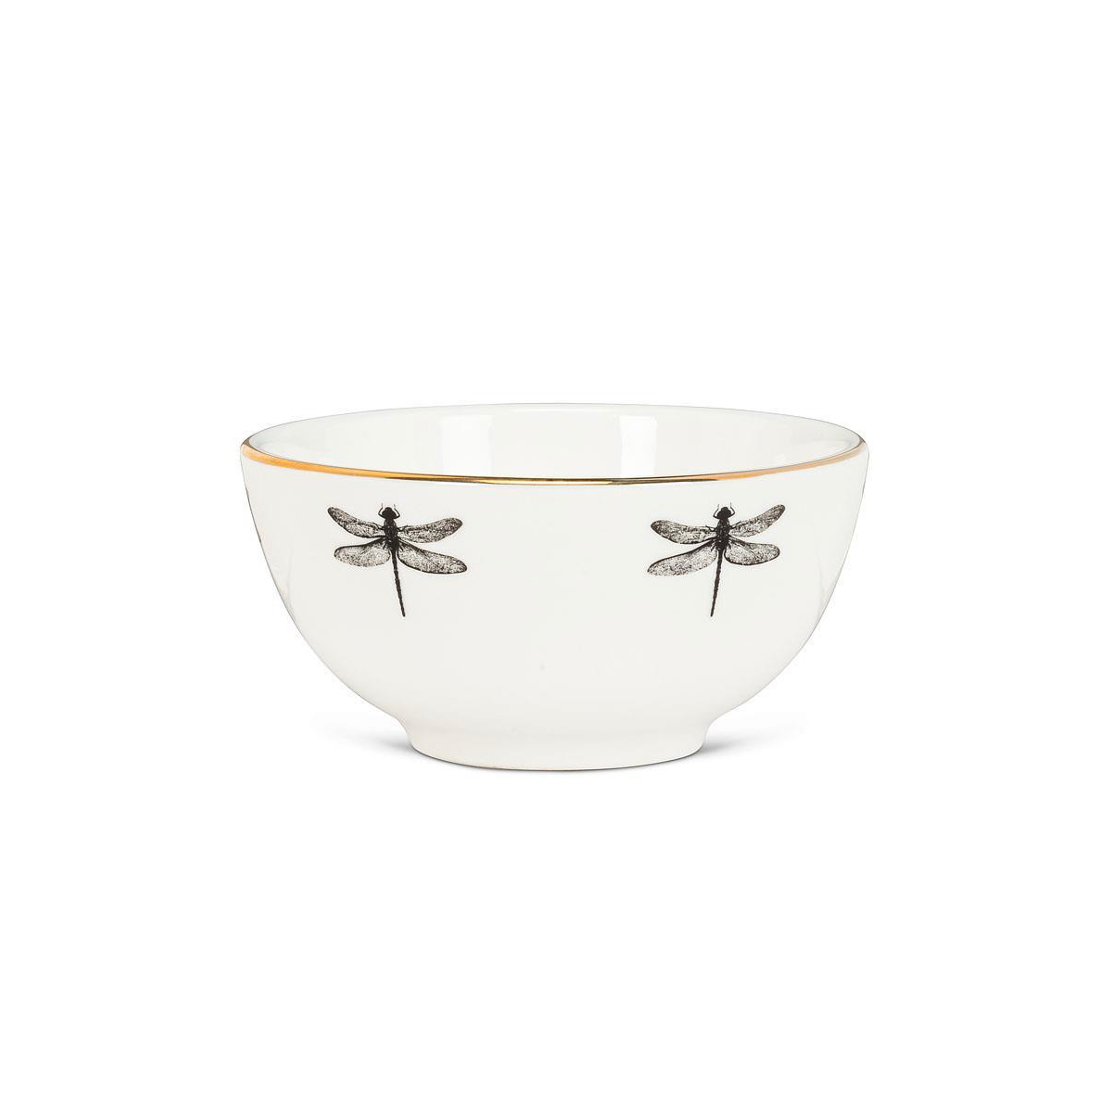 Dragonfly Bowl with Gold Rim